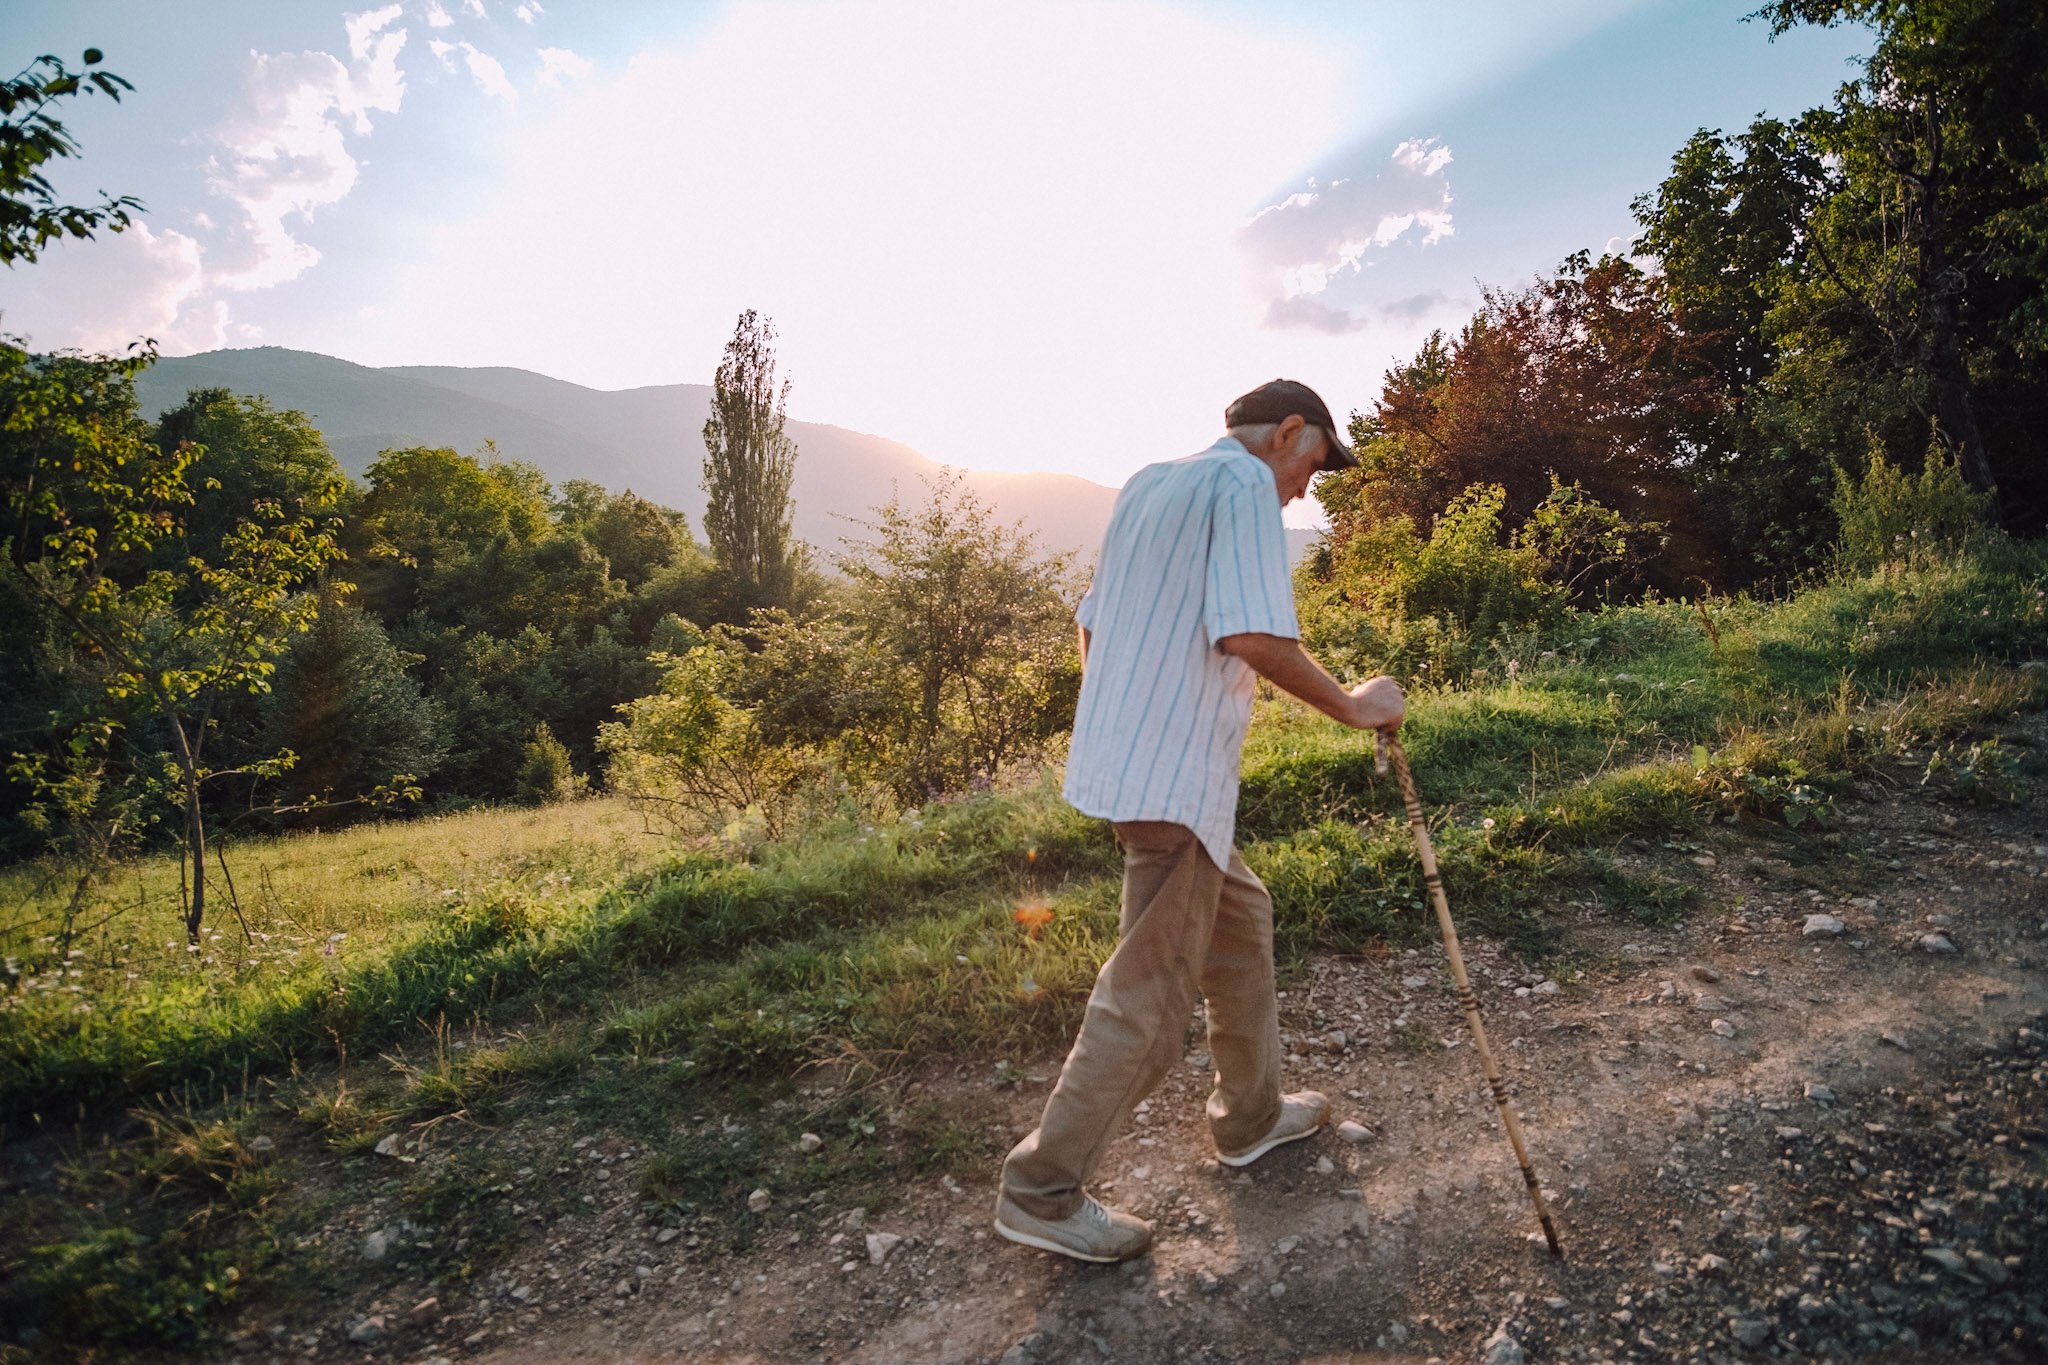 Paata is shown walking a path up a hill using a walking stick in this photo by Dimitri Mais